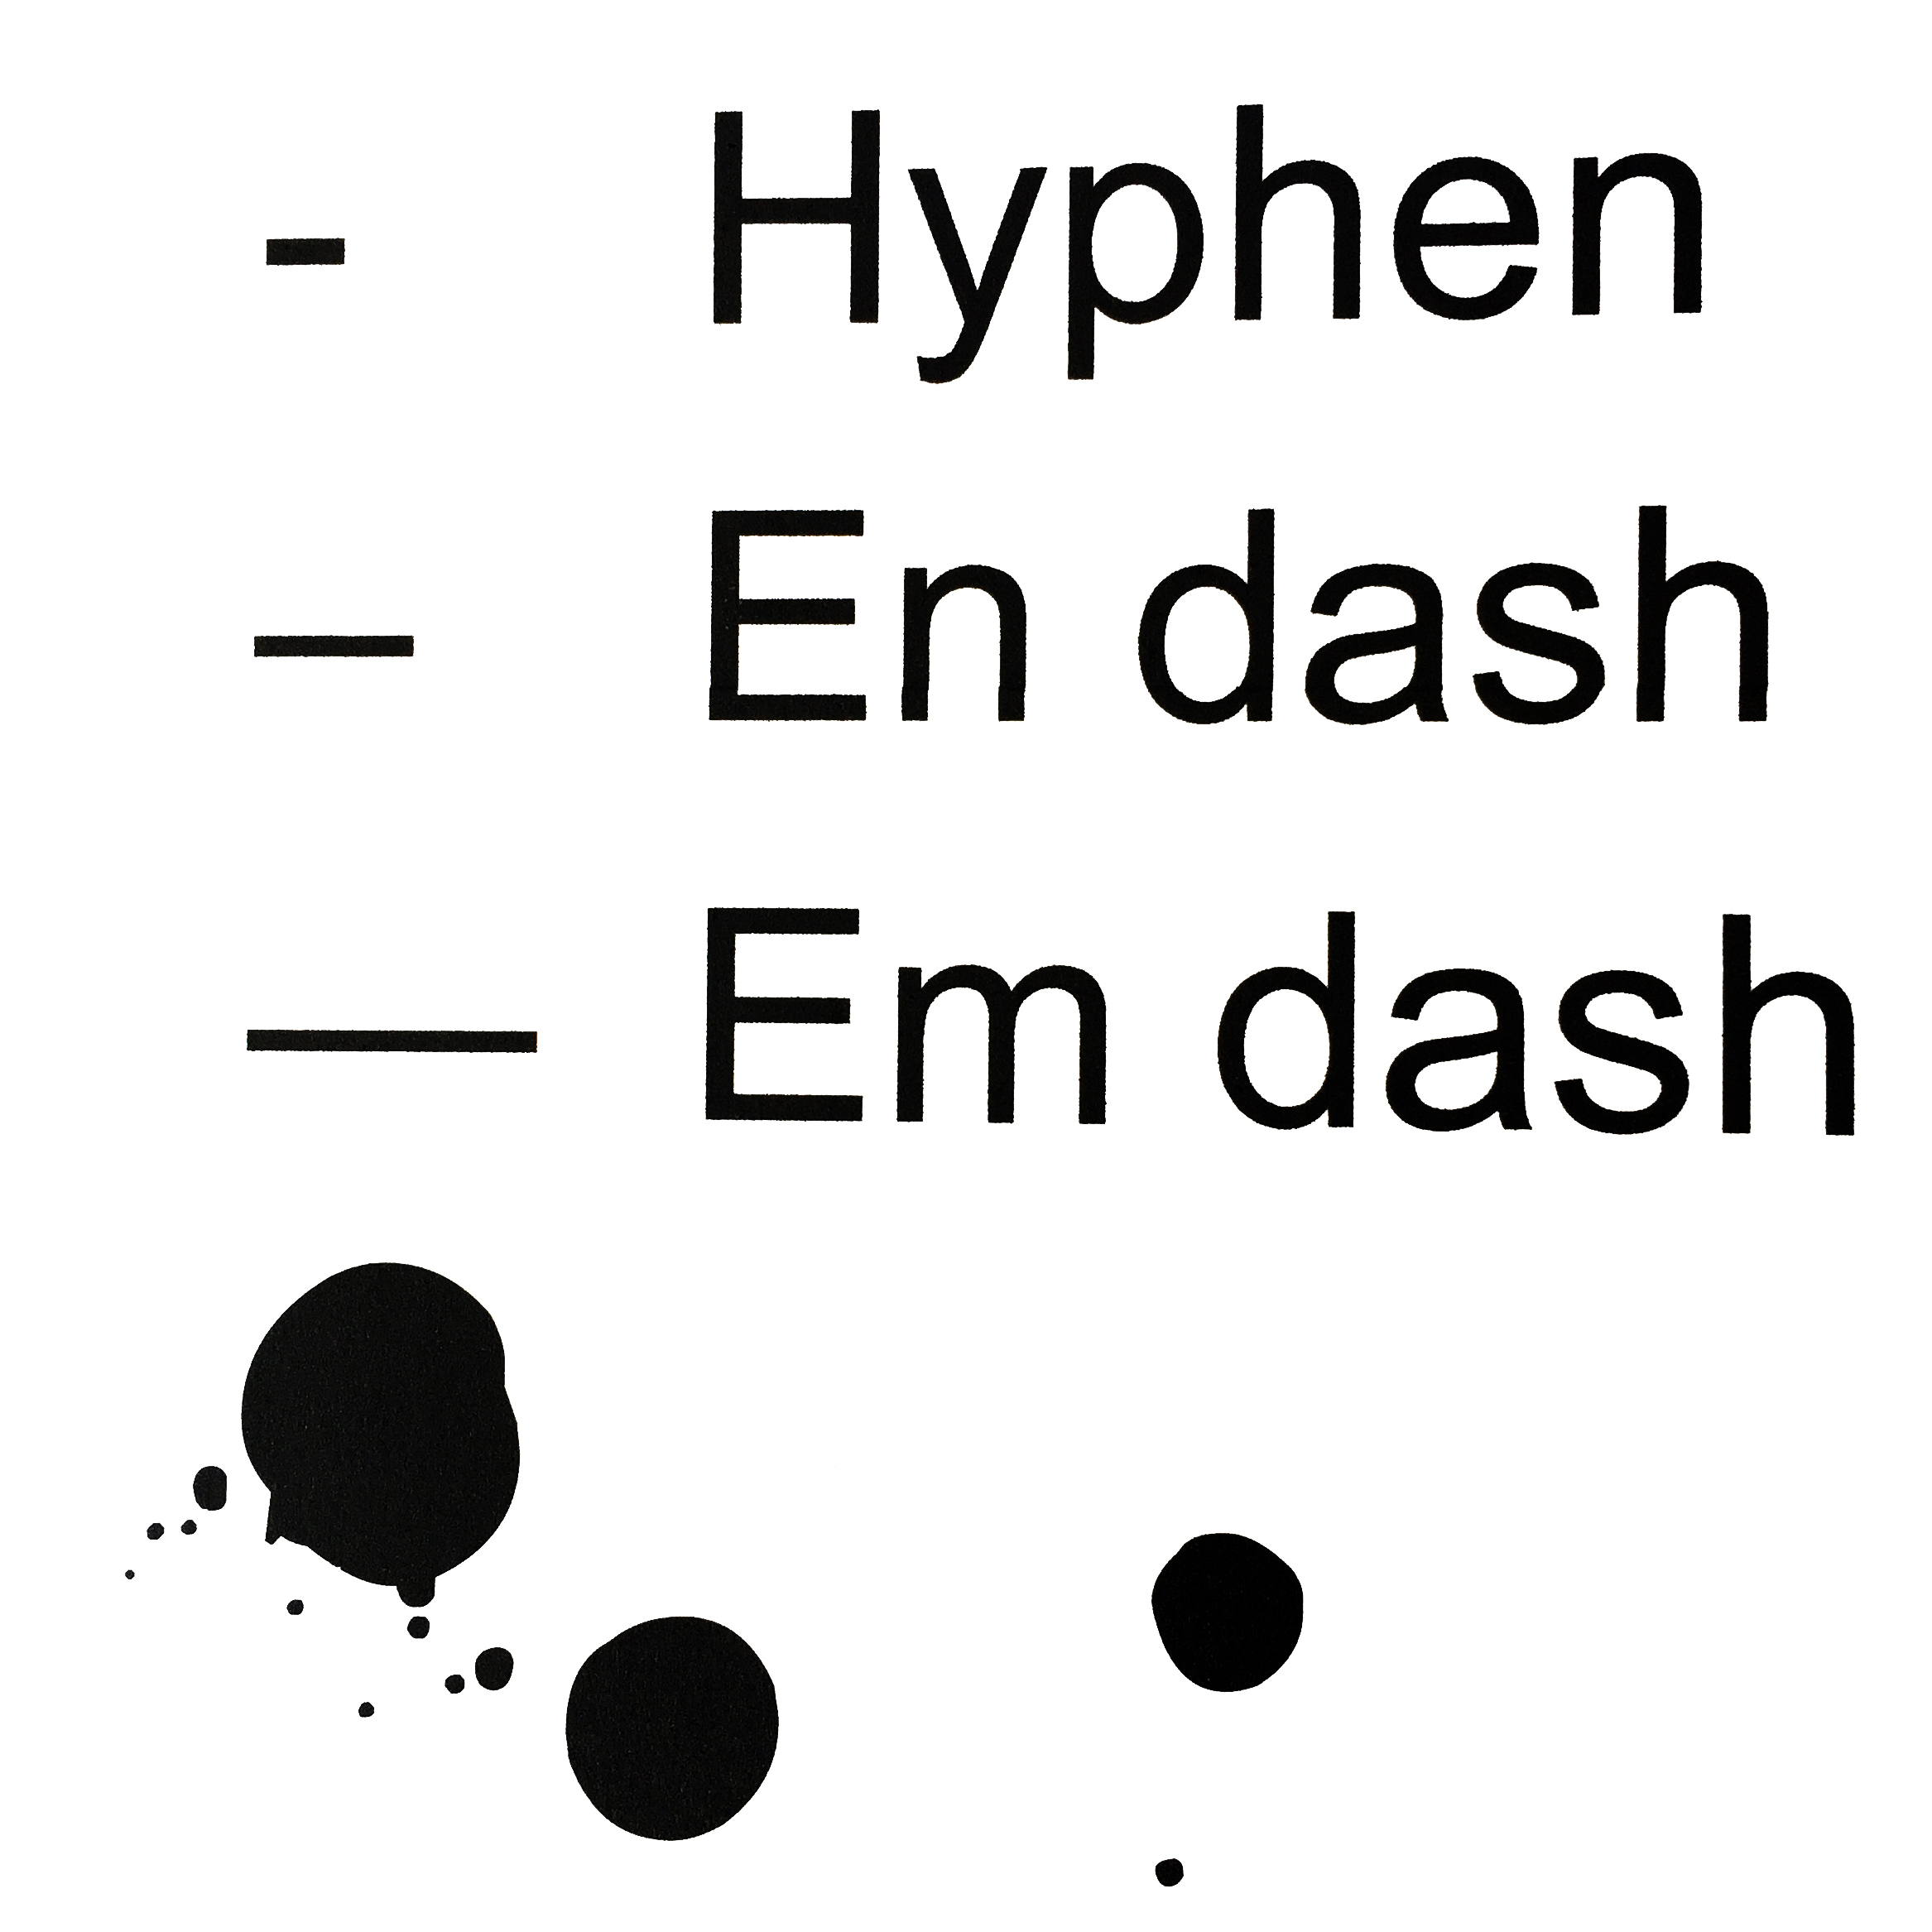 How to type an em dash symbol on a PC or Mac